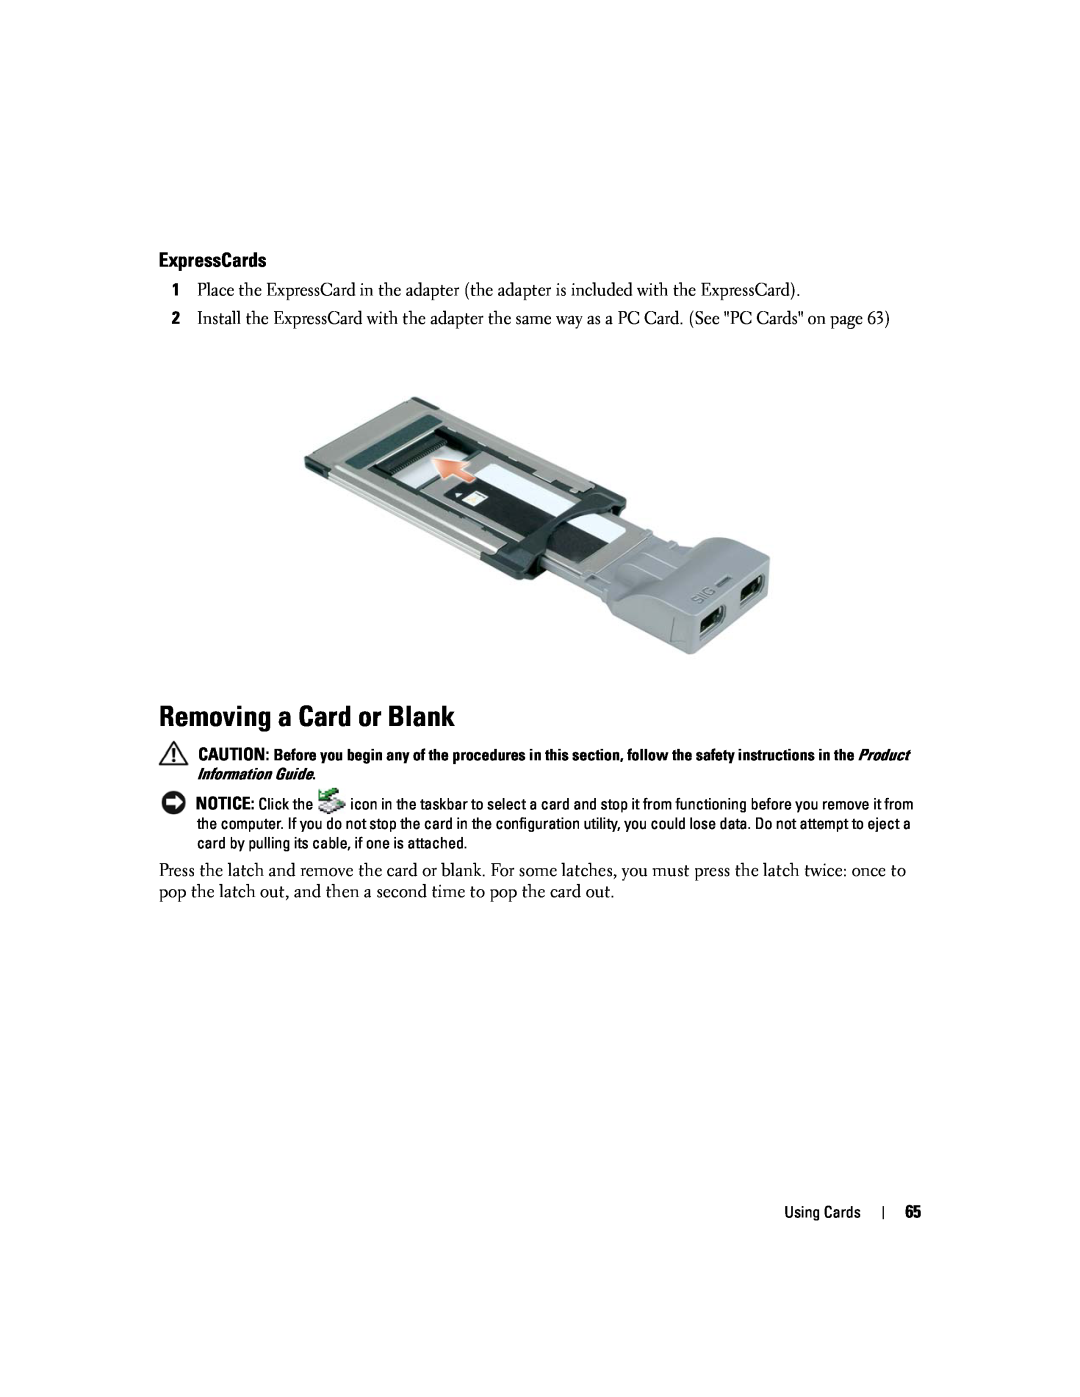 Dell PP24L manual Removing a Card or Blank, ExpressCards 